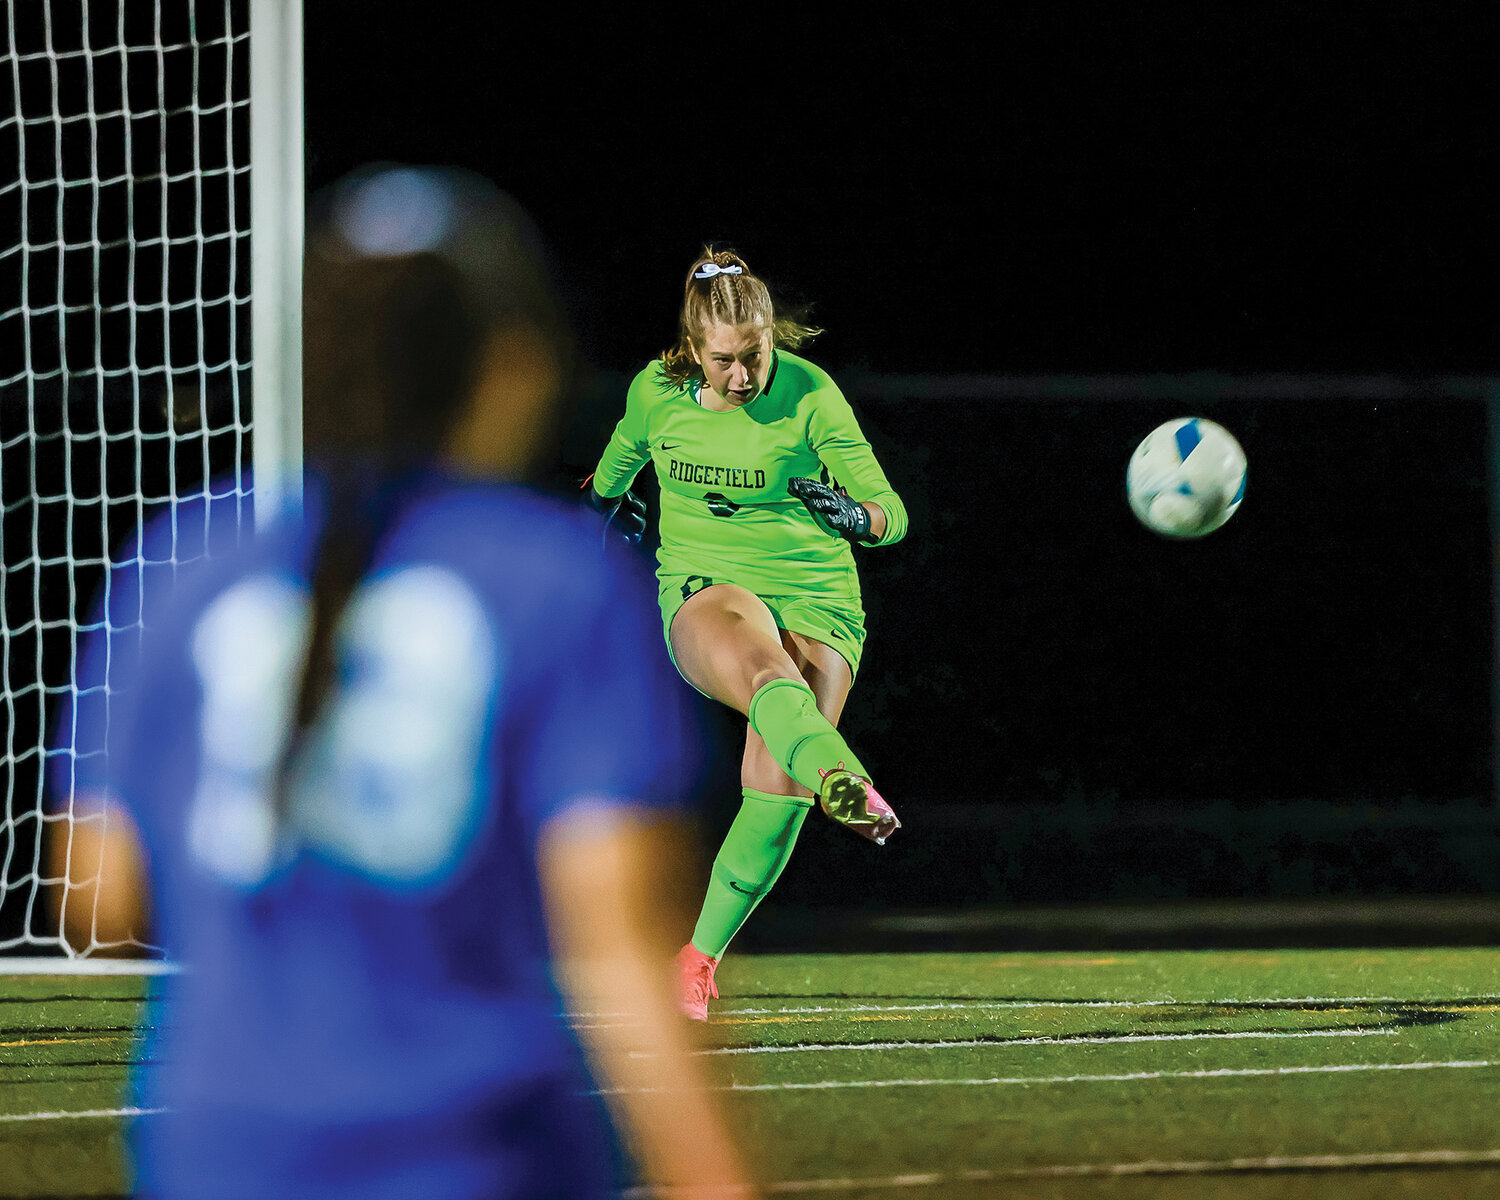 Spudders’ goalkeeper Tyler Merlock passes the ball down field during her seven-save shutout against Union in Ridgefield’s 2-0 non-league victory on Thursday, Sept. 7.